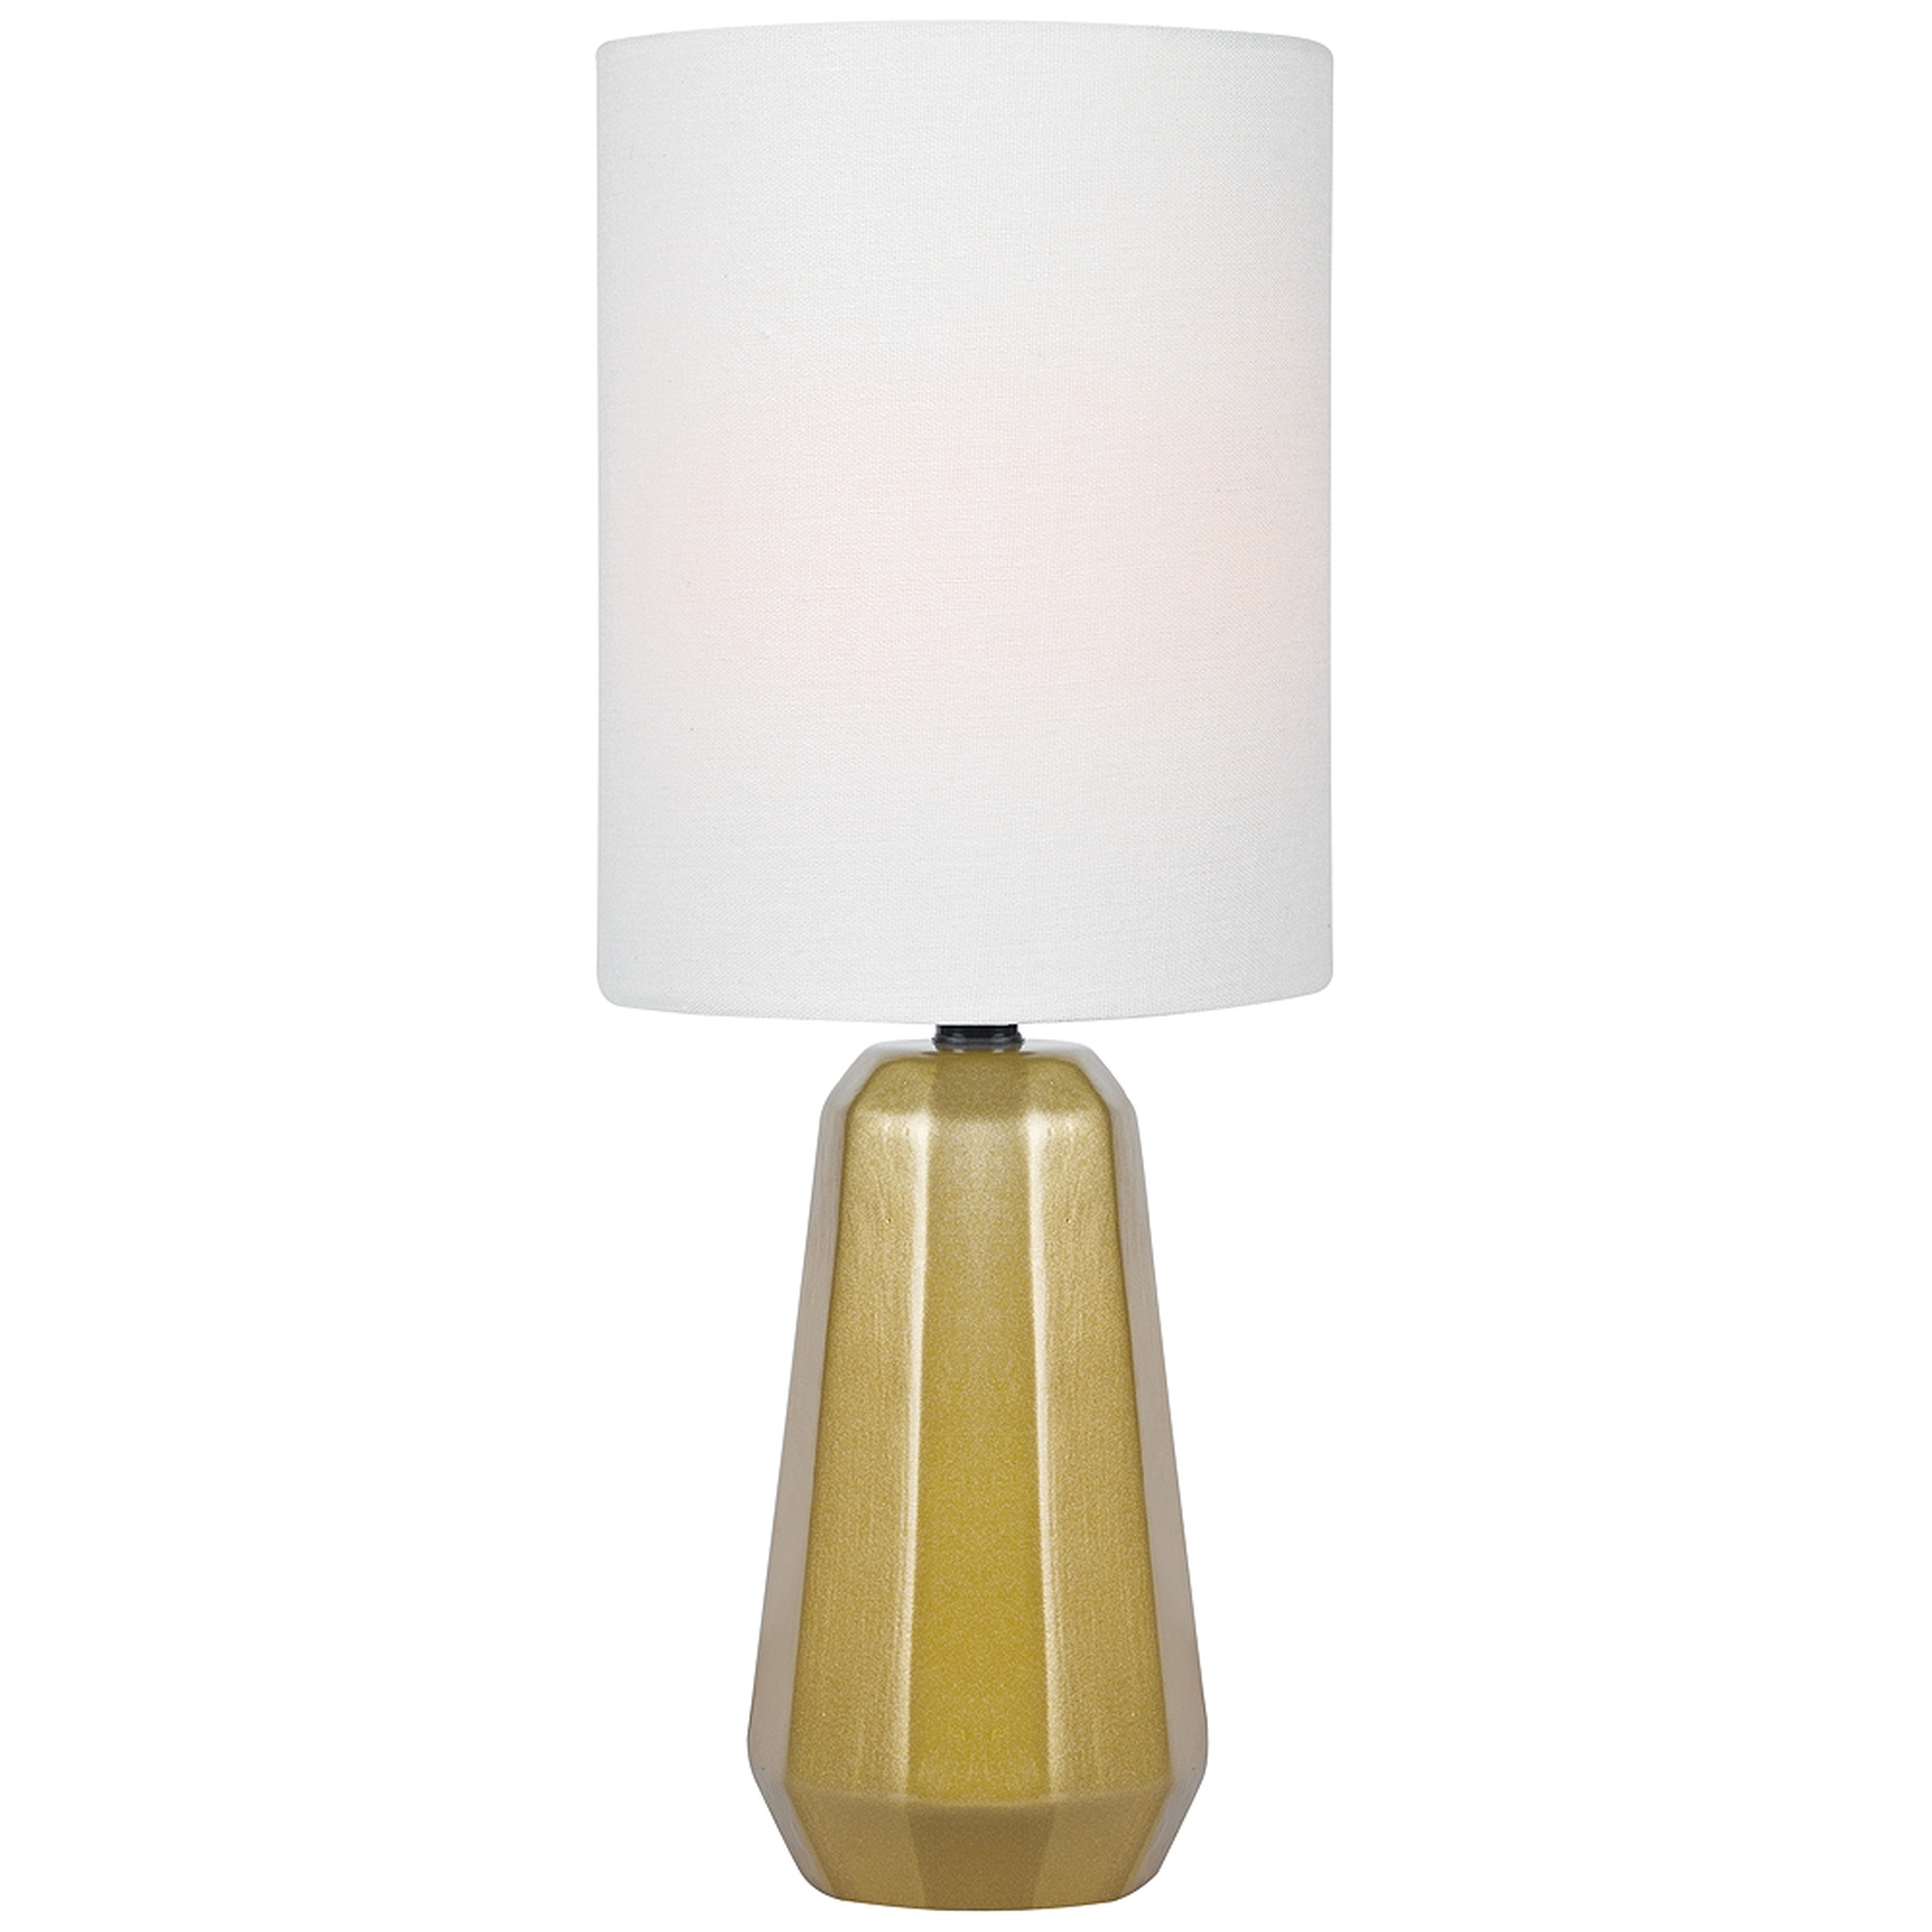 Lite Source Charna 17 1/2"H Gold Ceramic Accent Table Lamp - Style # 56J85 - Lamps Plus